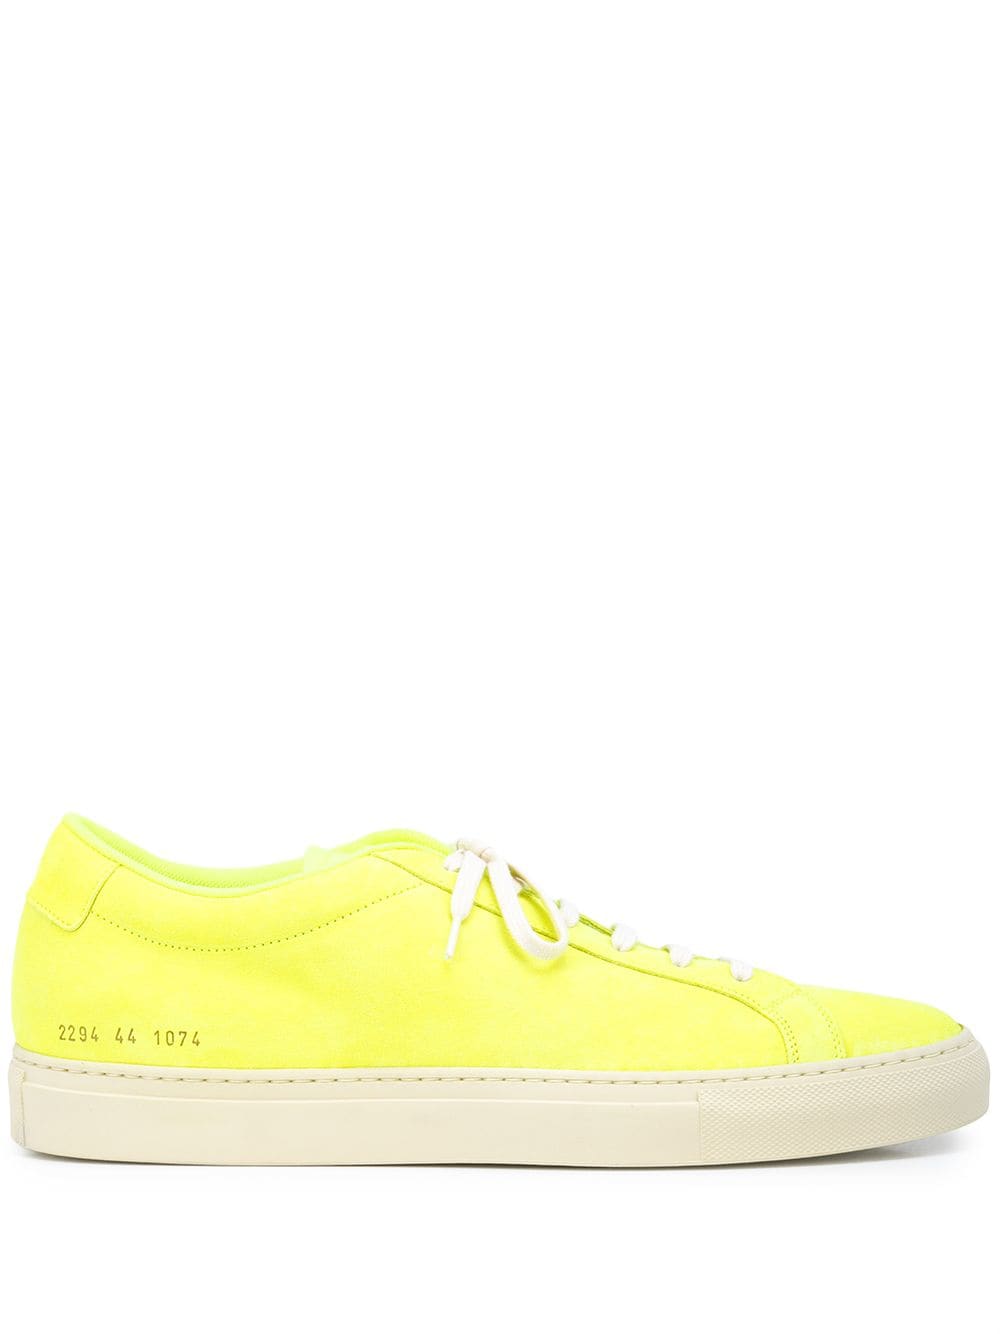 Common Projects Achilles suede sneakers - Yellow von Common Projects